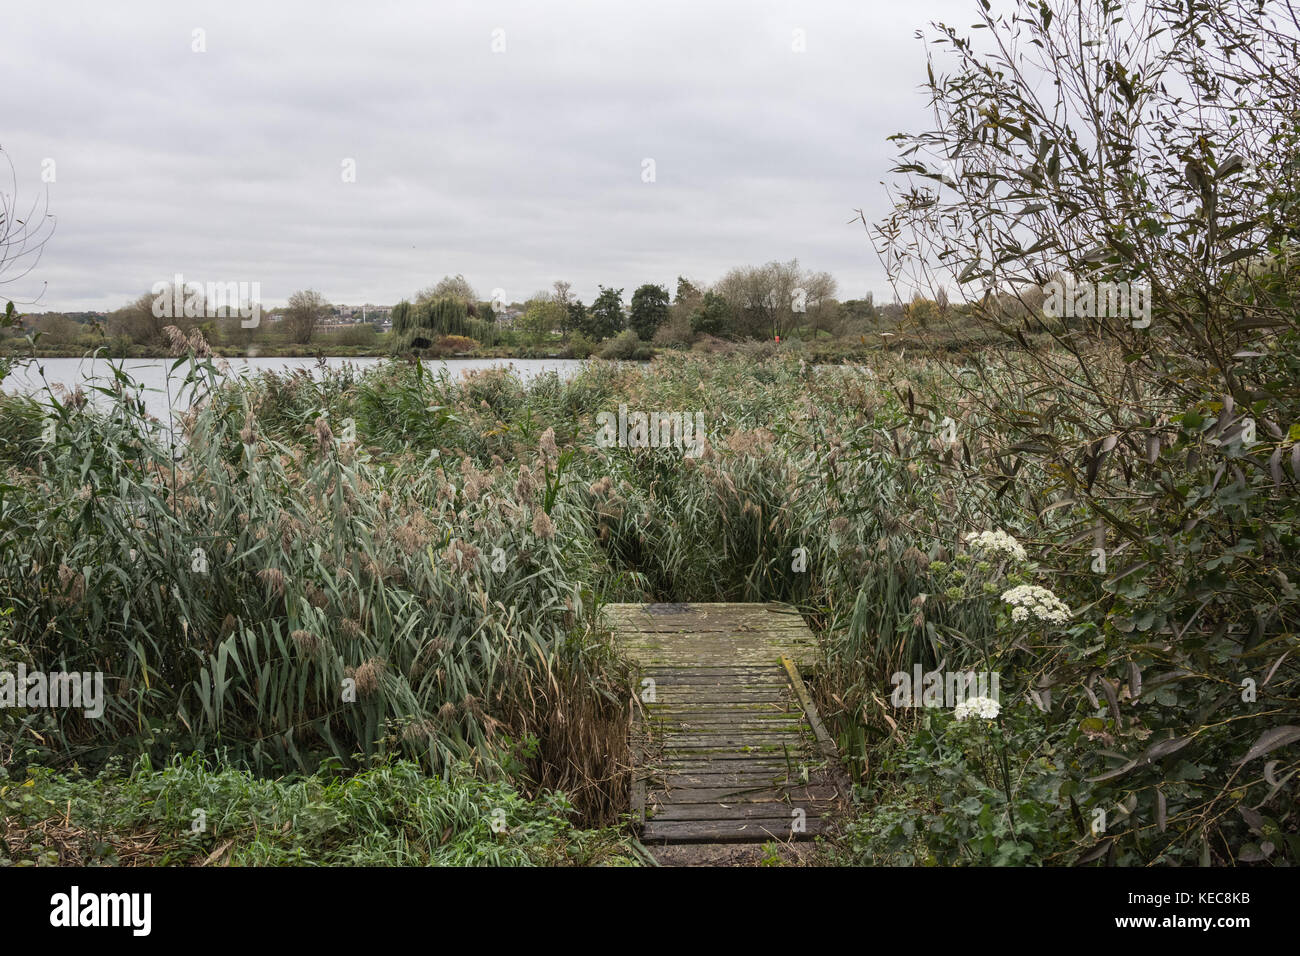 Walthamstow Wetlands, one of Europe’s largest urban wetlands and a fully operational reservoir. It provides drinking water for 1.5 million people, as well as providing shelter to abundant urban wildlife. Credit: Patricia Phillips/ Alamy Live news Stock Photo